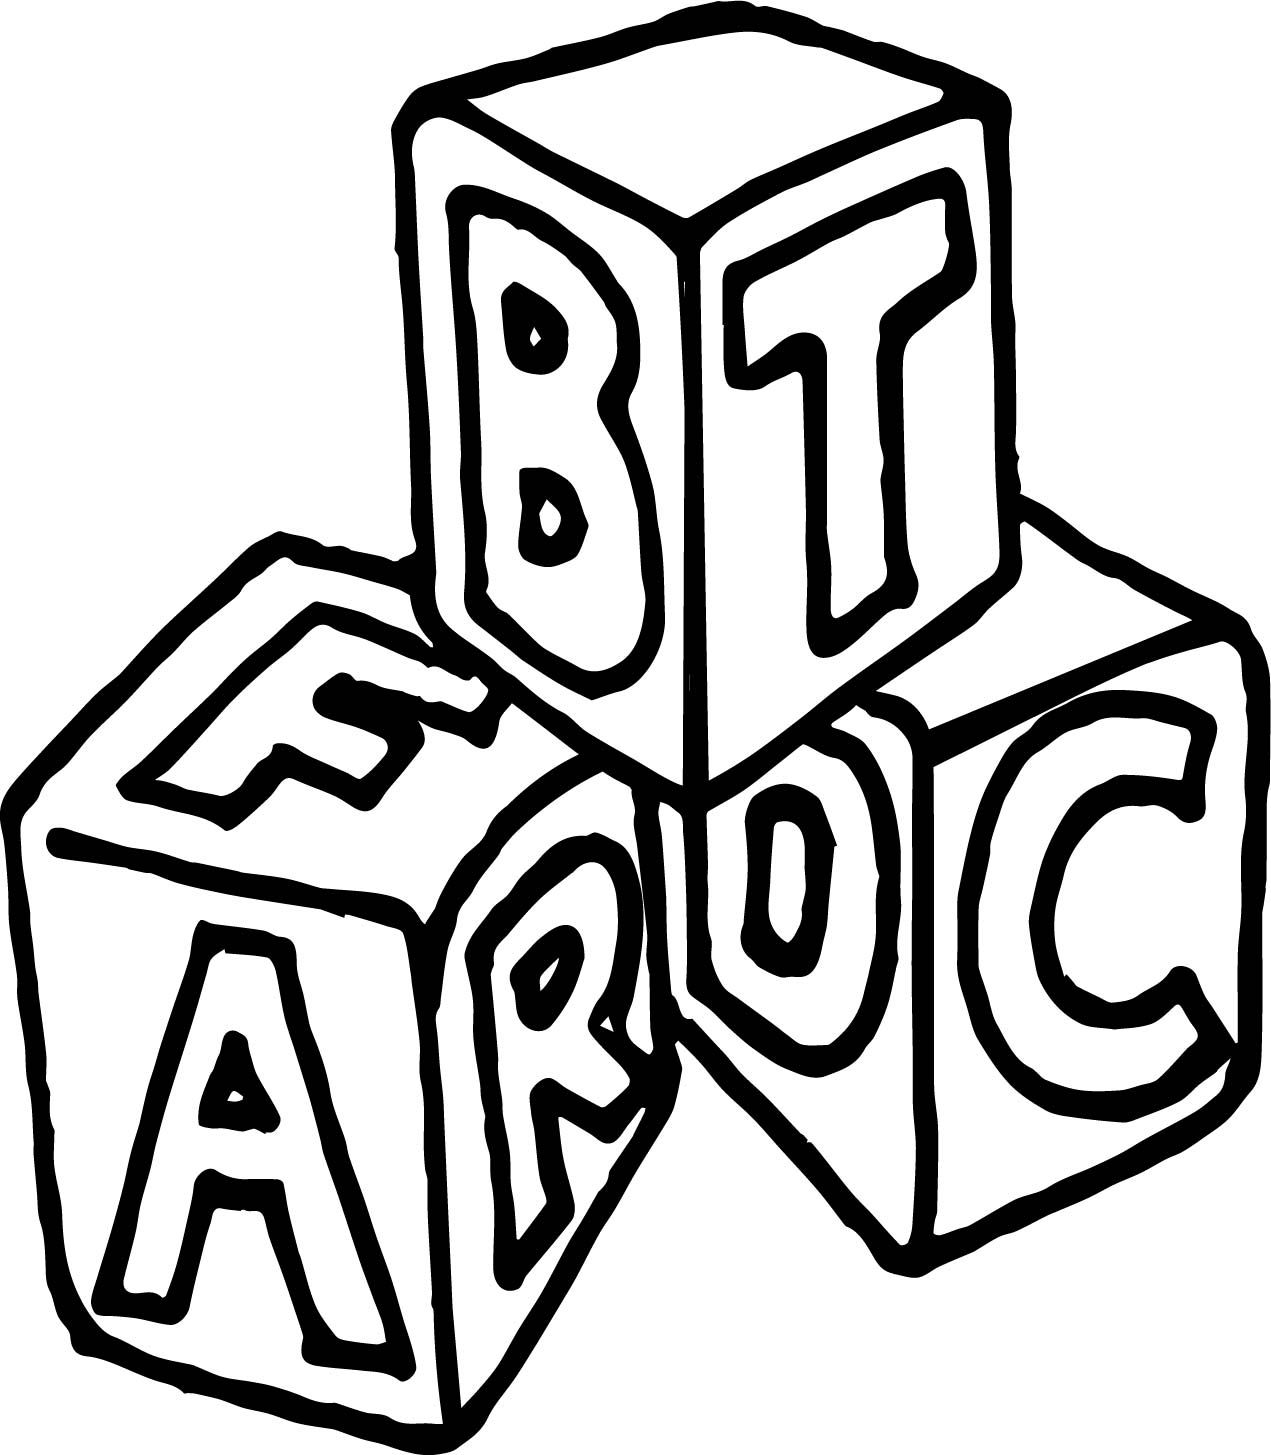 cool A B C Box Cube Coloring Page | Coloring pages, Coloring pages for  boys, Bible coloring